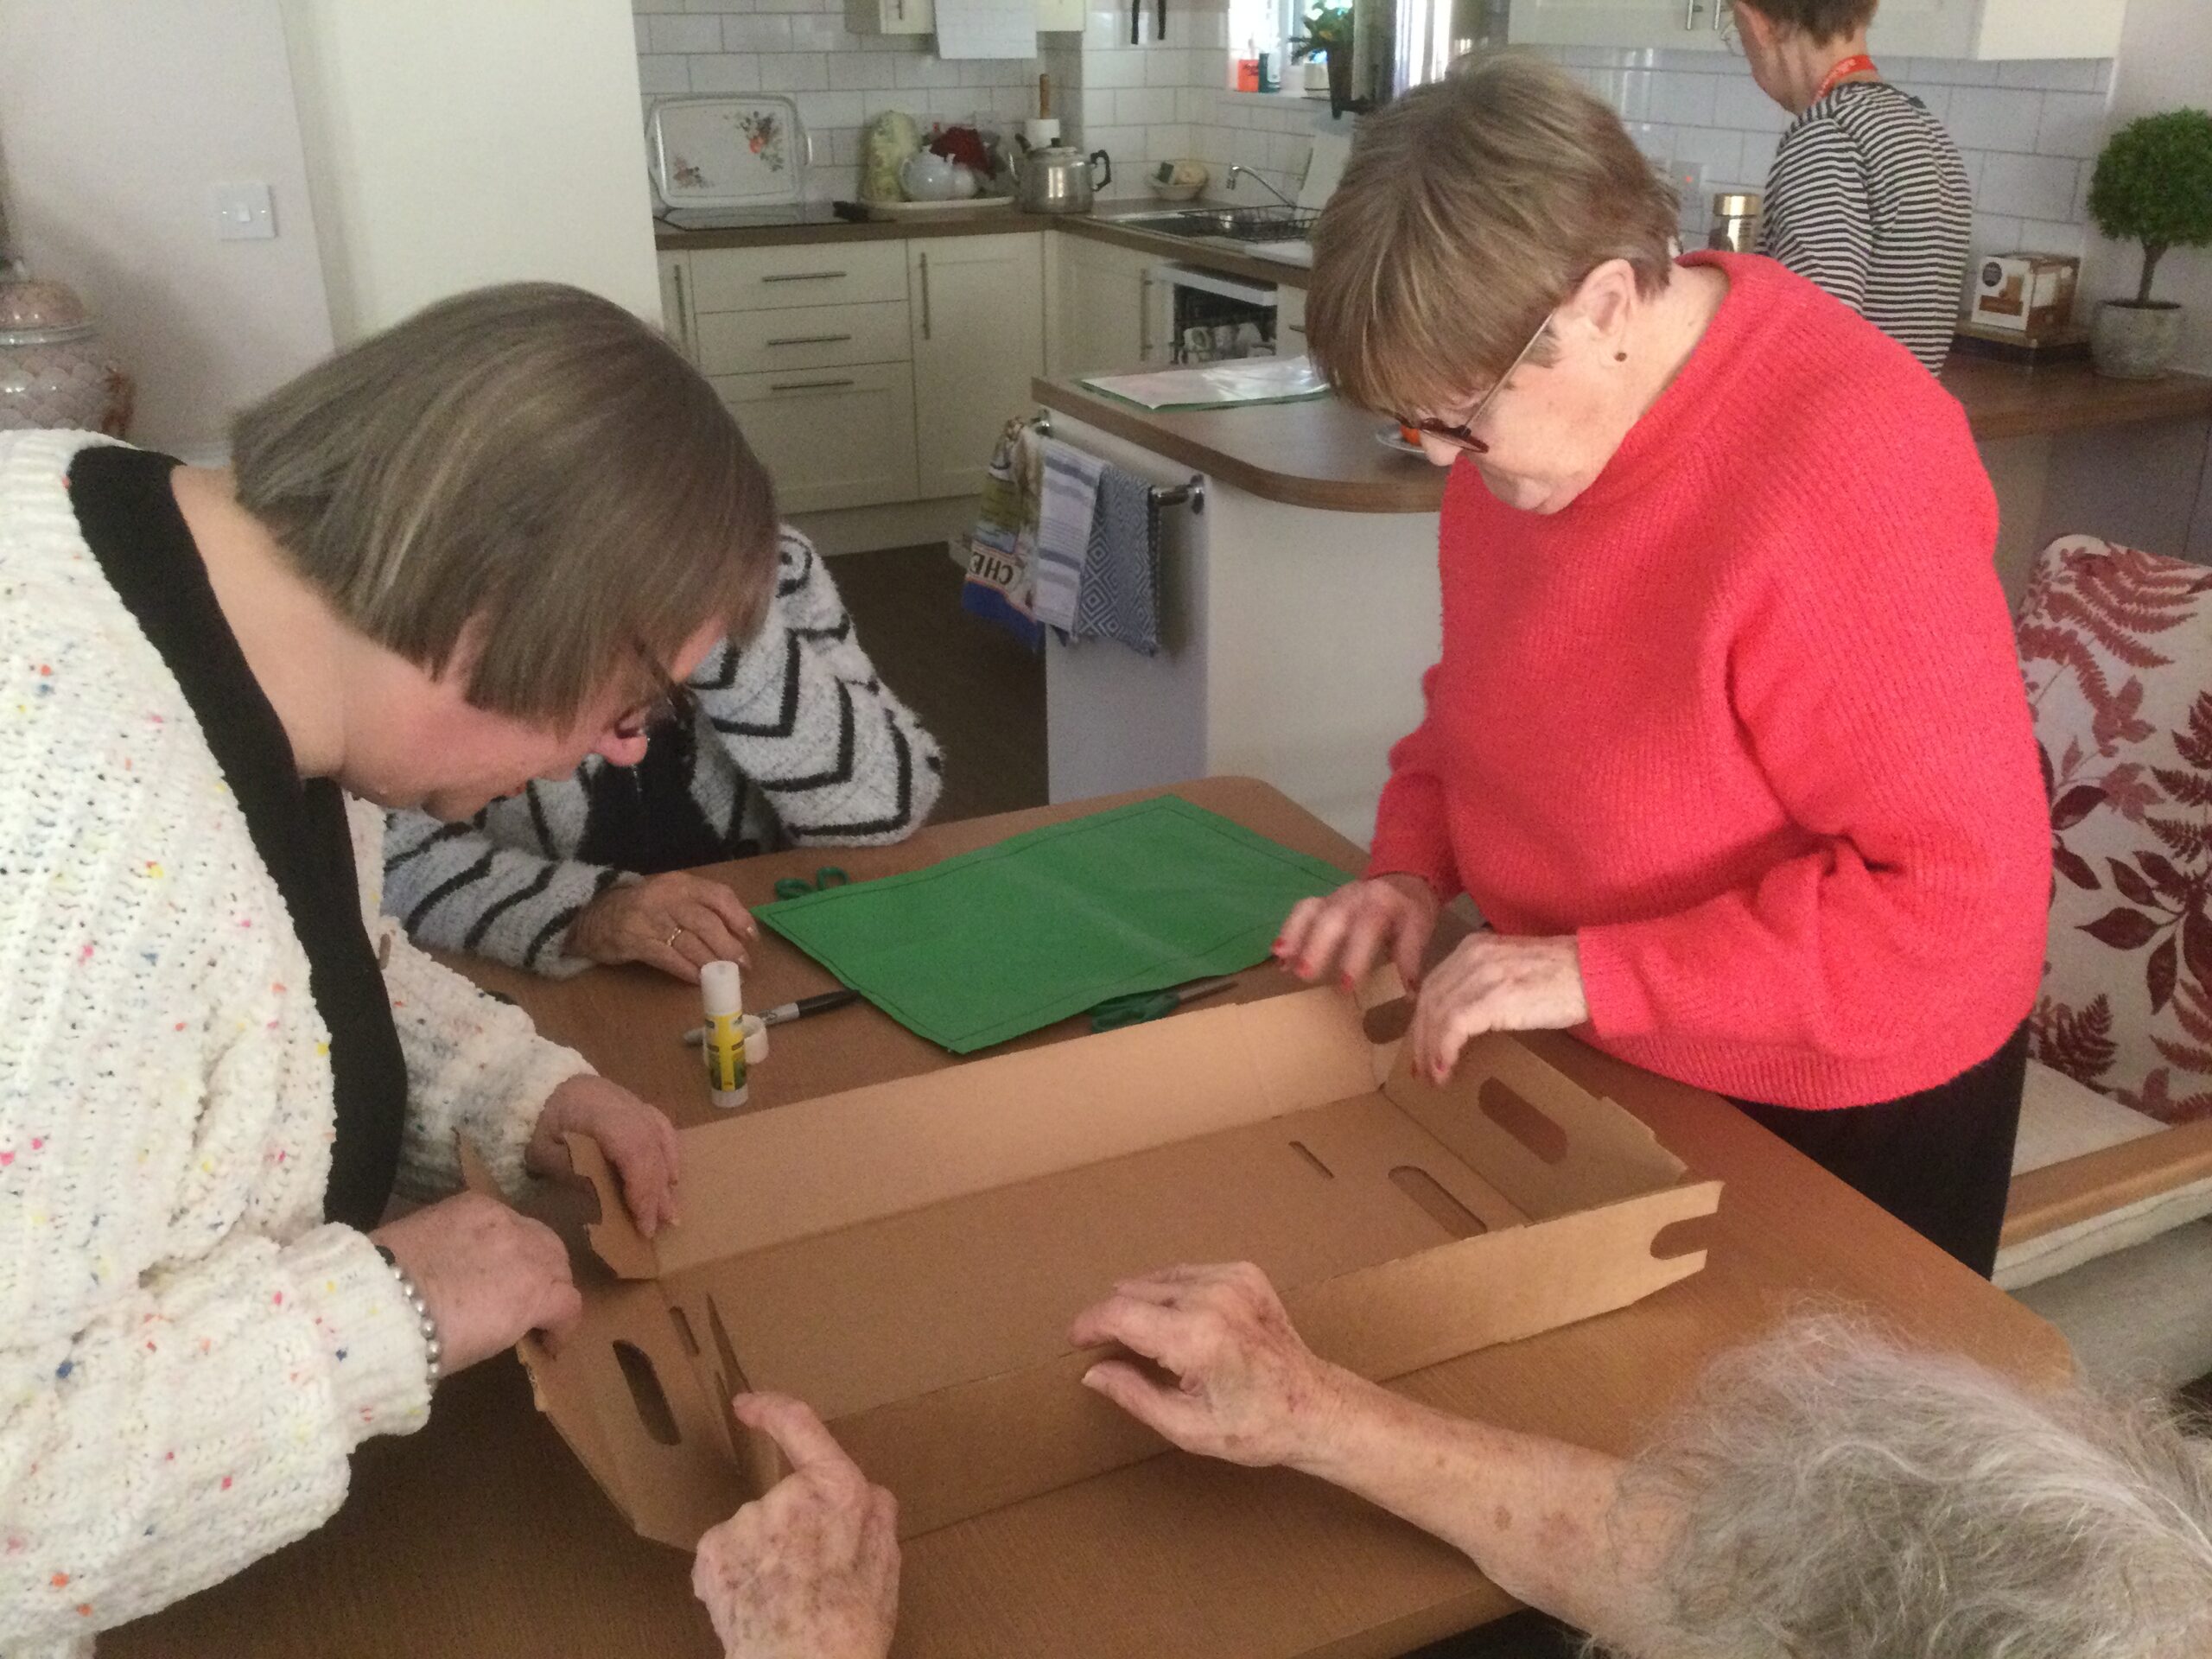 Two women standing at a table, constructing a brown cardboard box